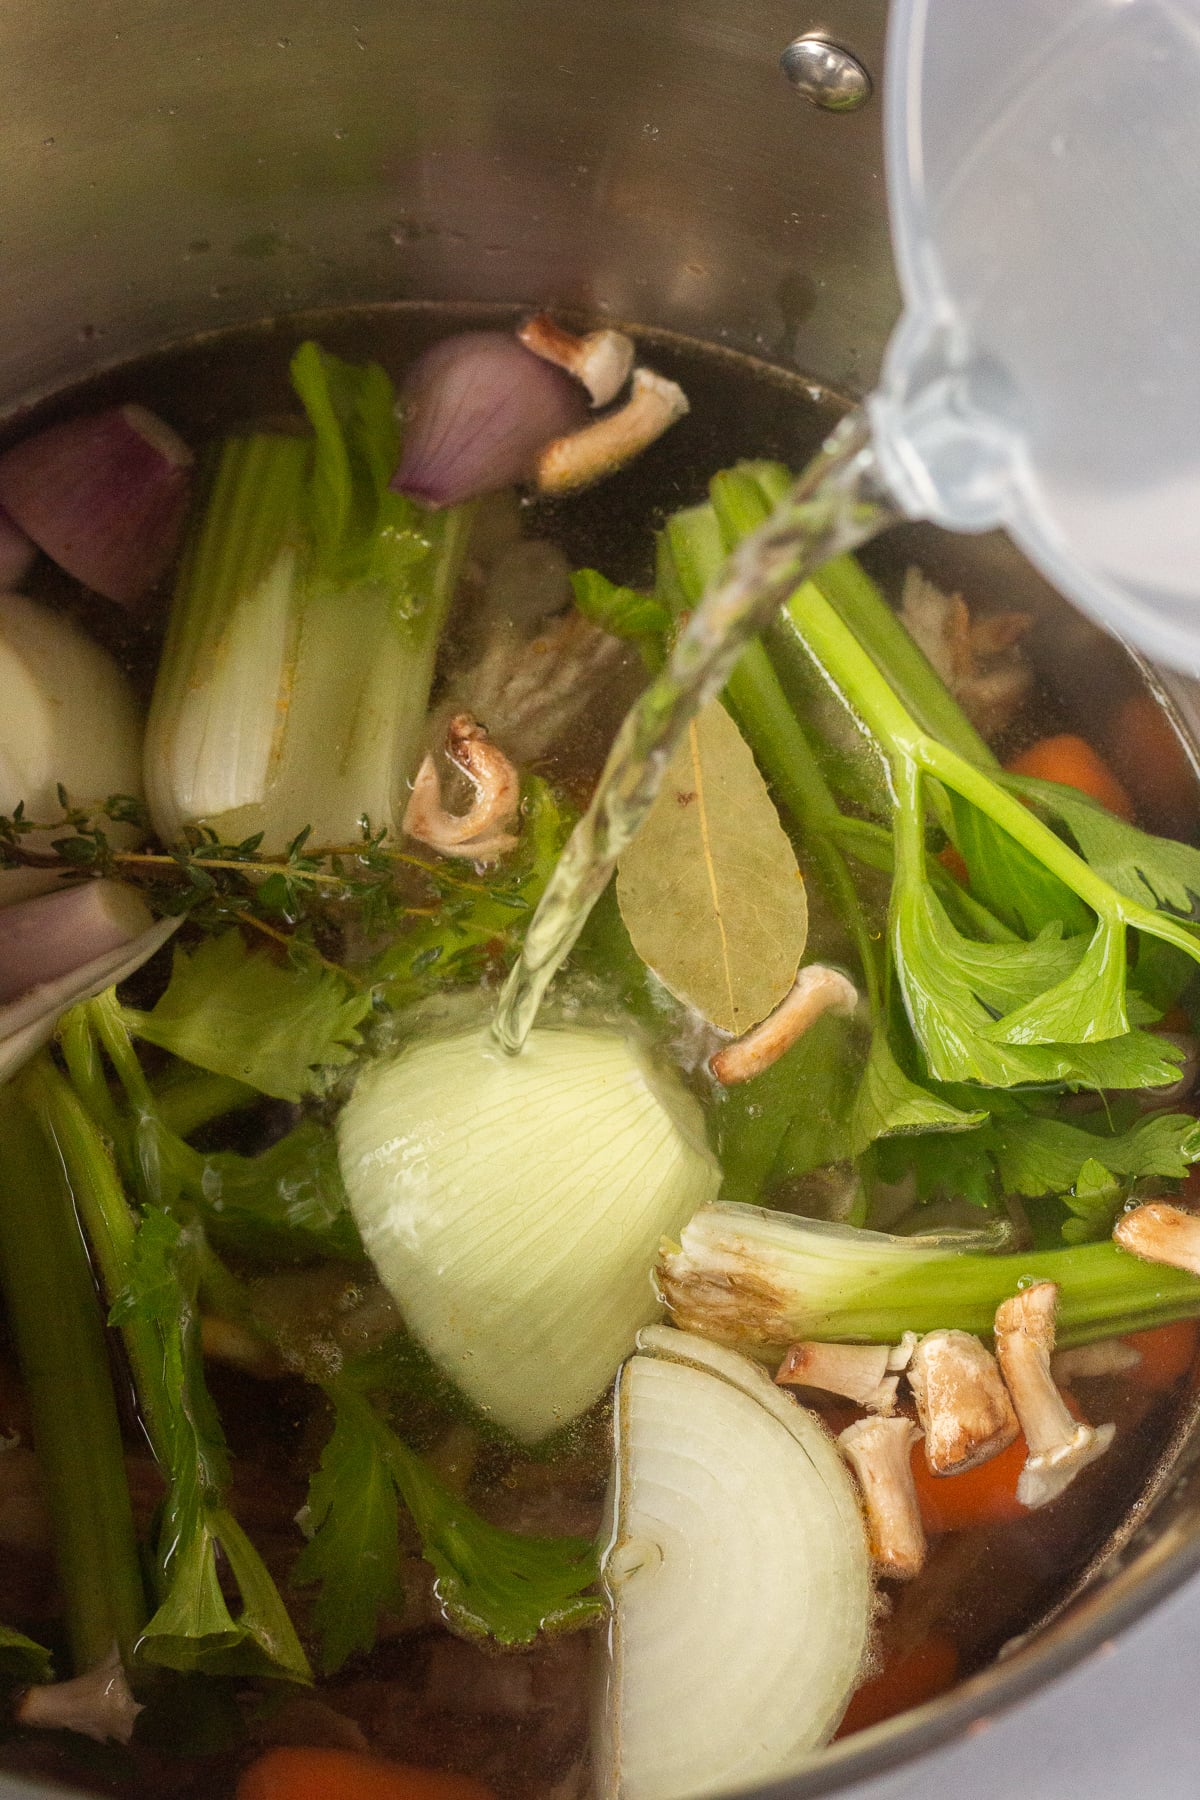 Water being poured into a large stock pot containing a chicken carcass and chopped up veggies.